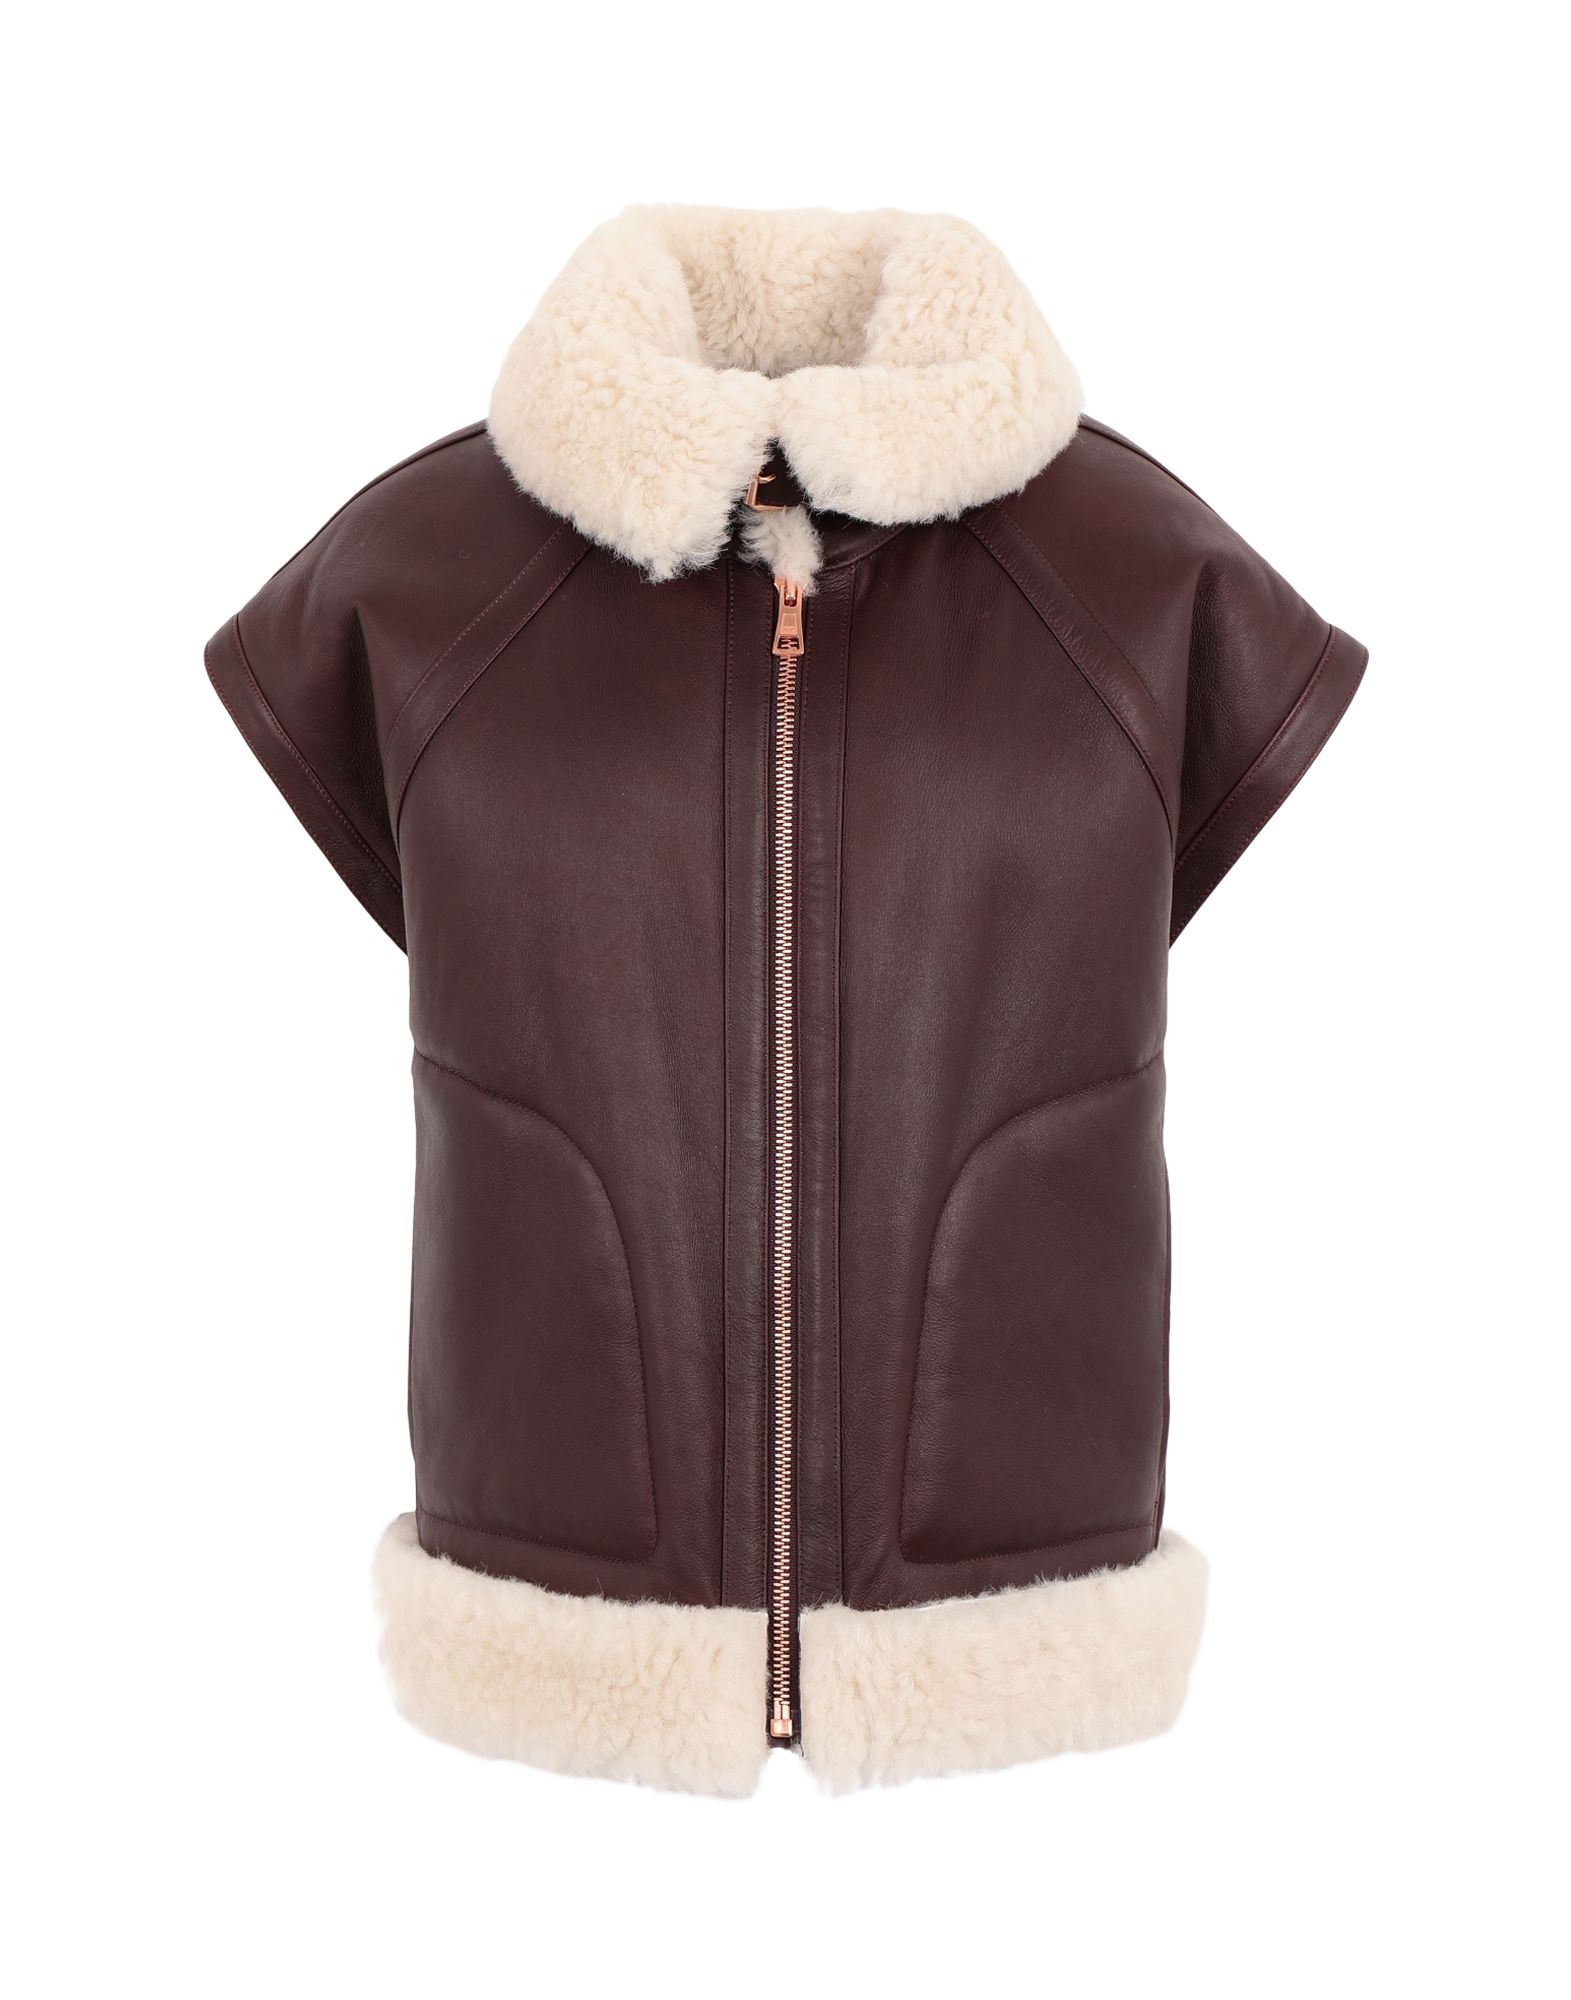 SEE BY CHLOÉ Jacke & Anorak Damen Pflaume von SEE BY CHLOÉ